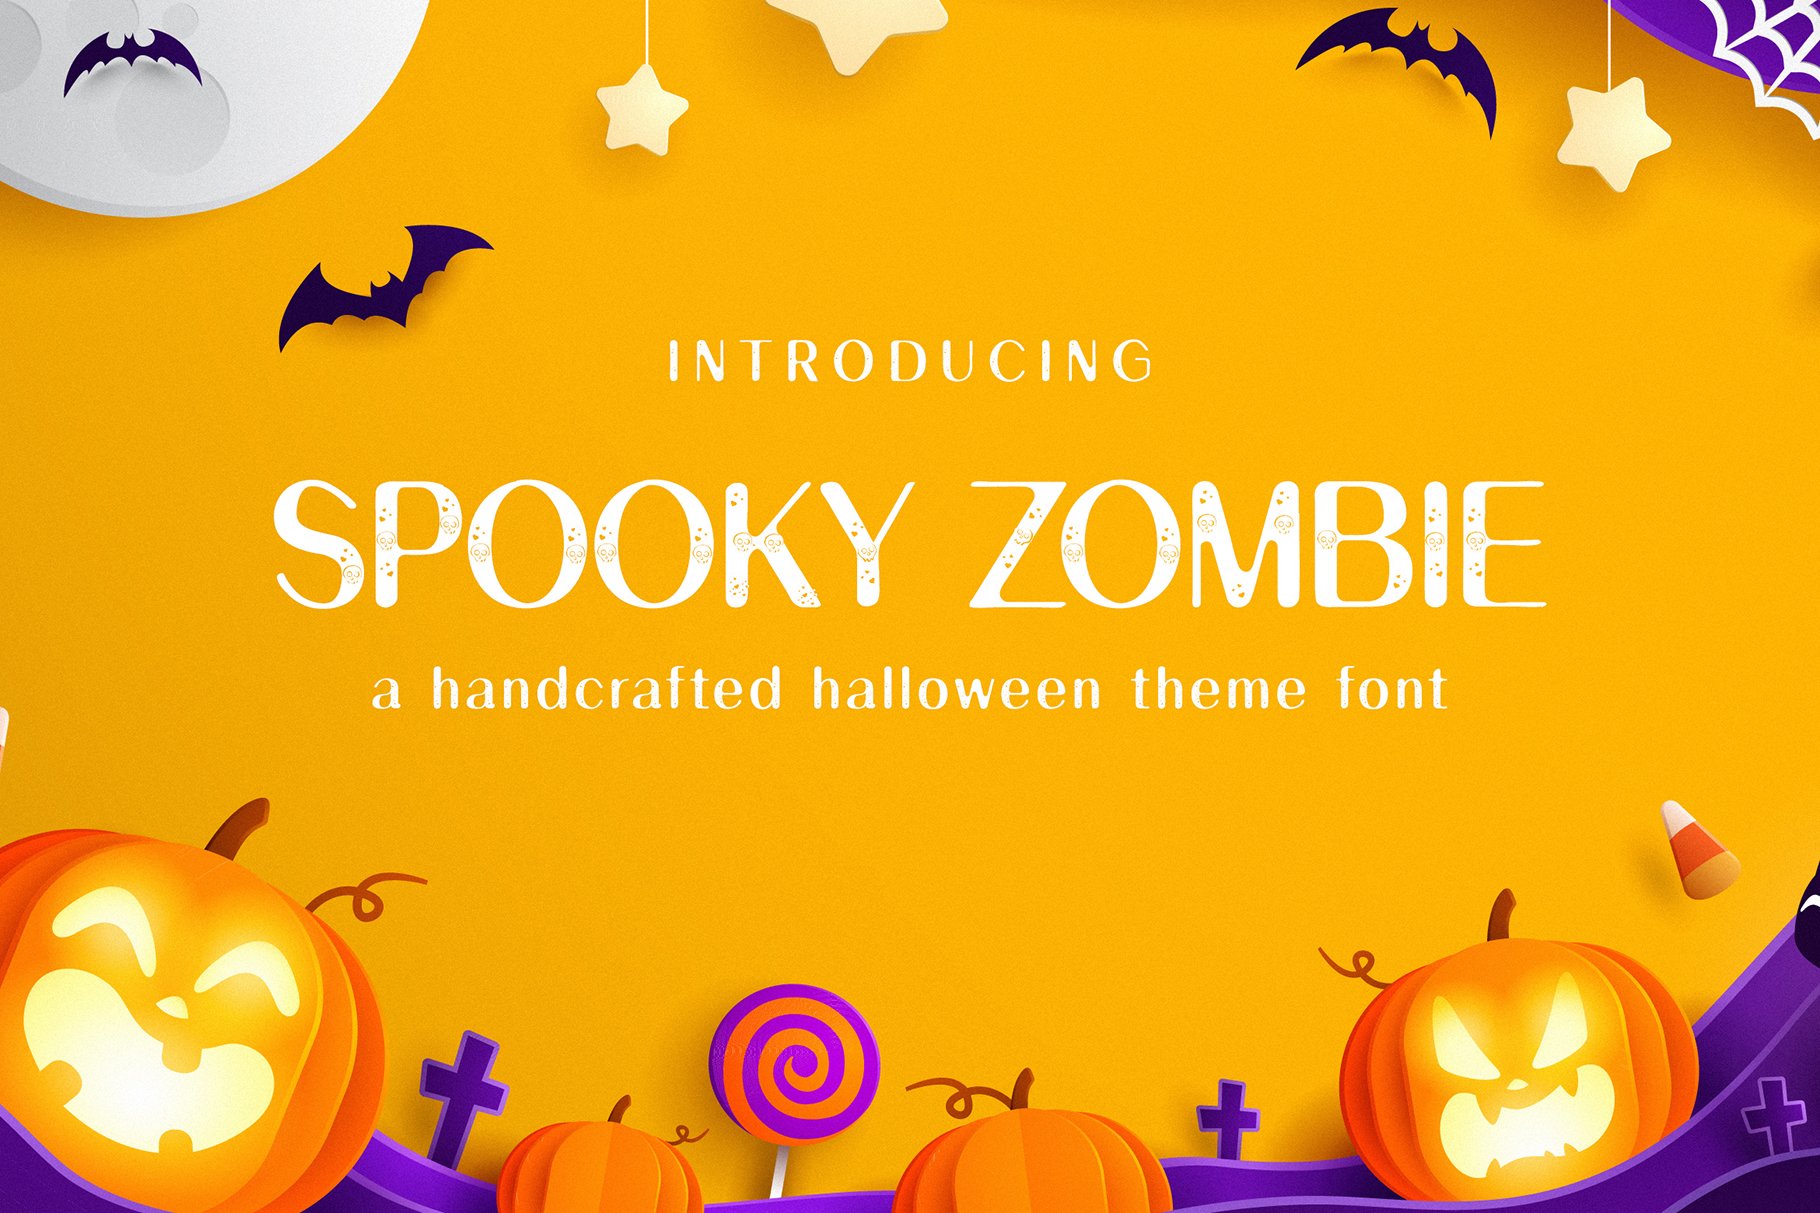 Spooky Zombie Display Font cover image.